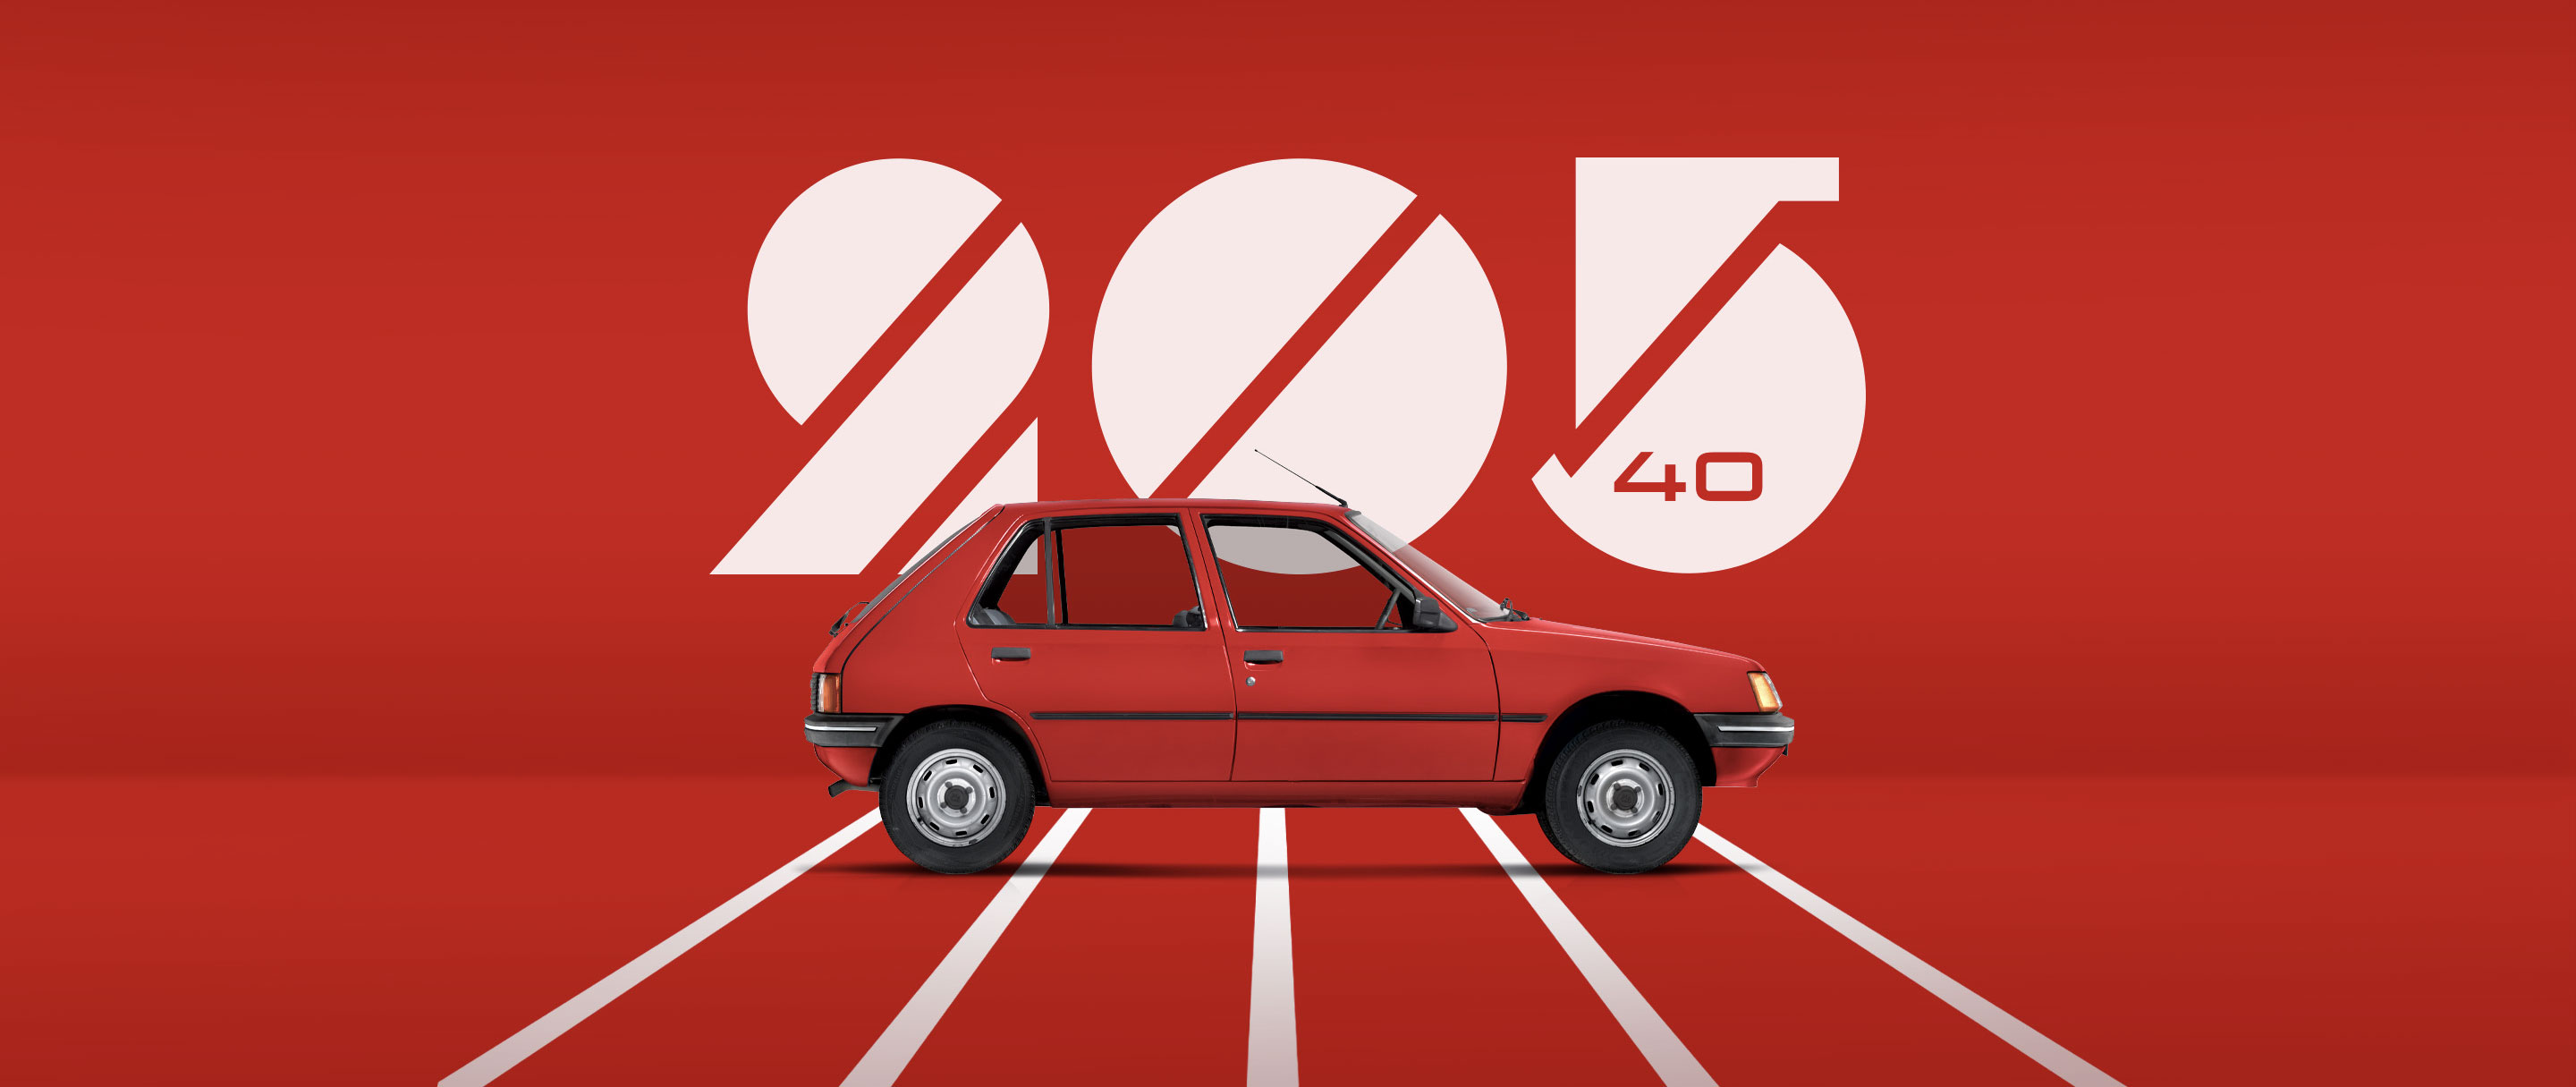 The PEUGEOT 205 is turning 40: an alluring sacred number, Peugeot